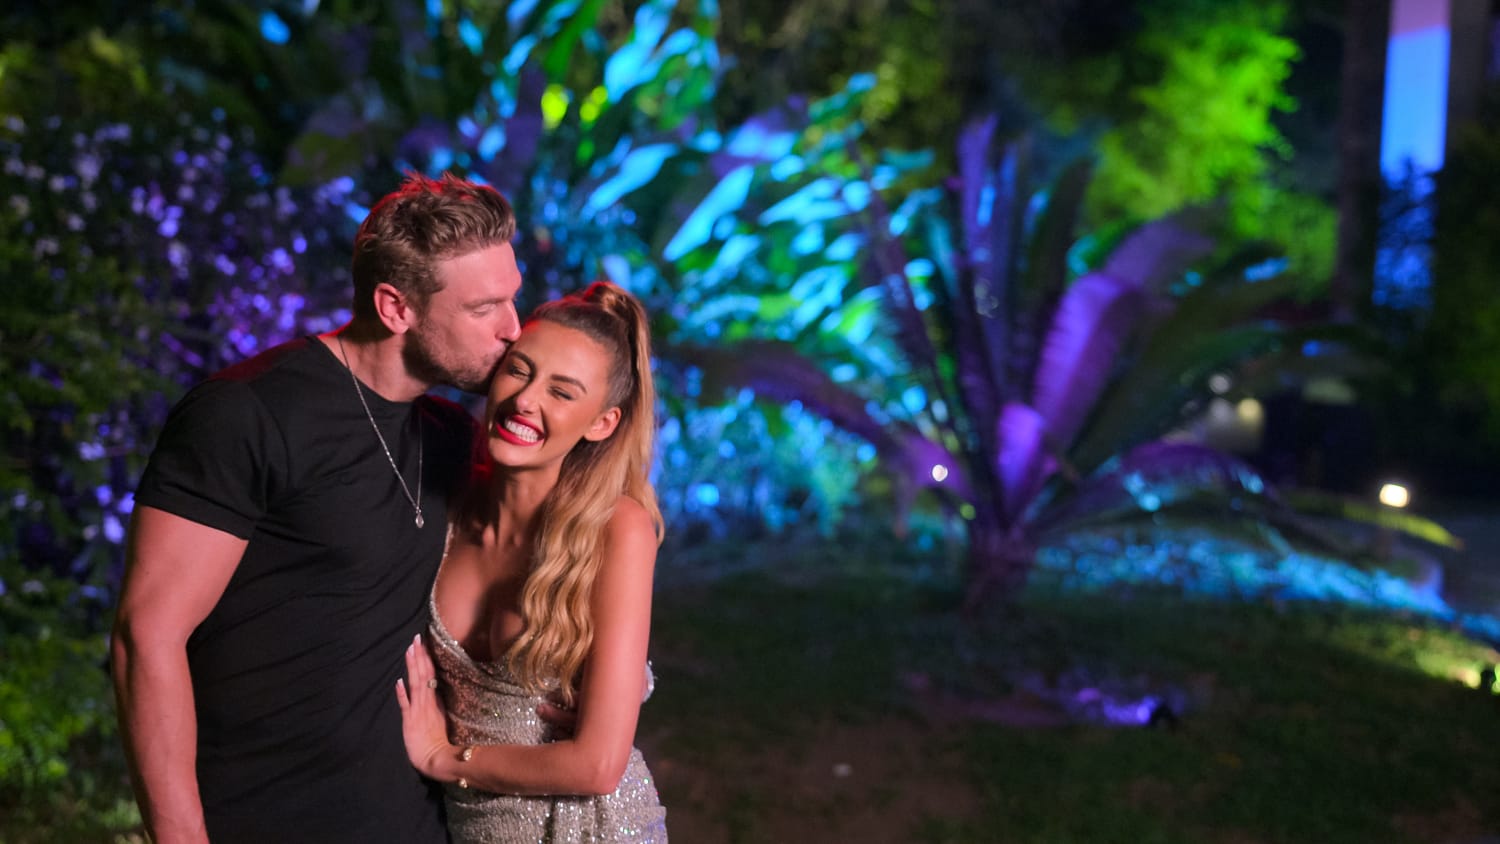 Are Chloe And Shayne From 'Perfect Match' Still Together?